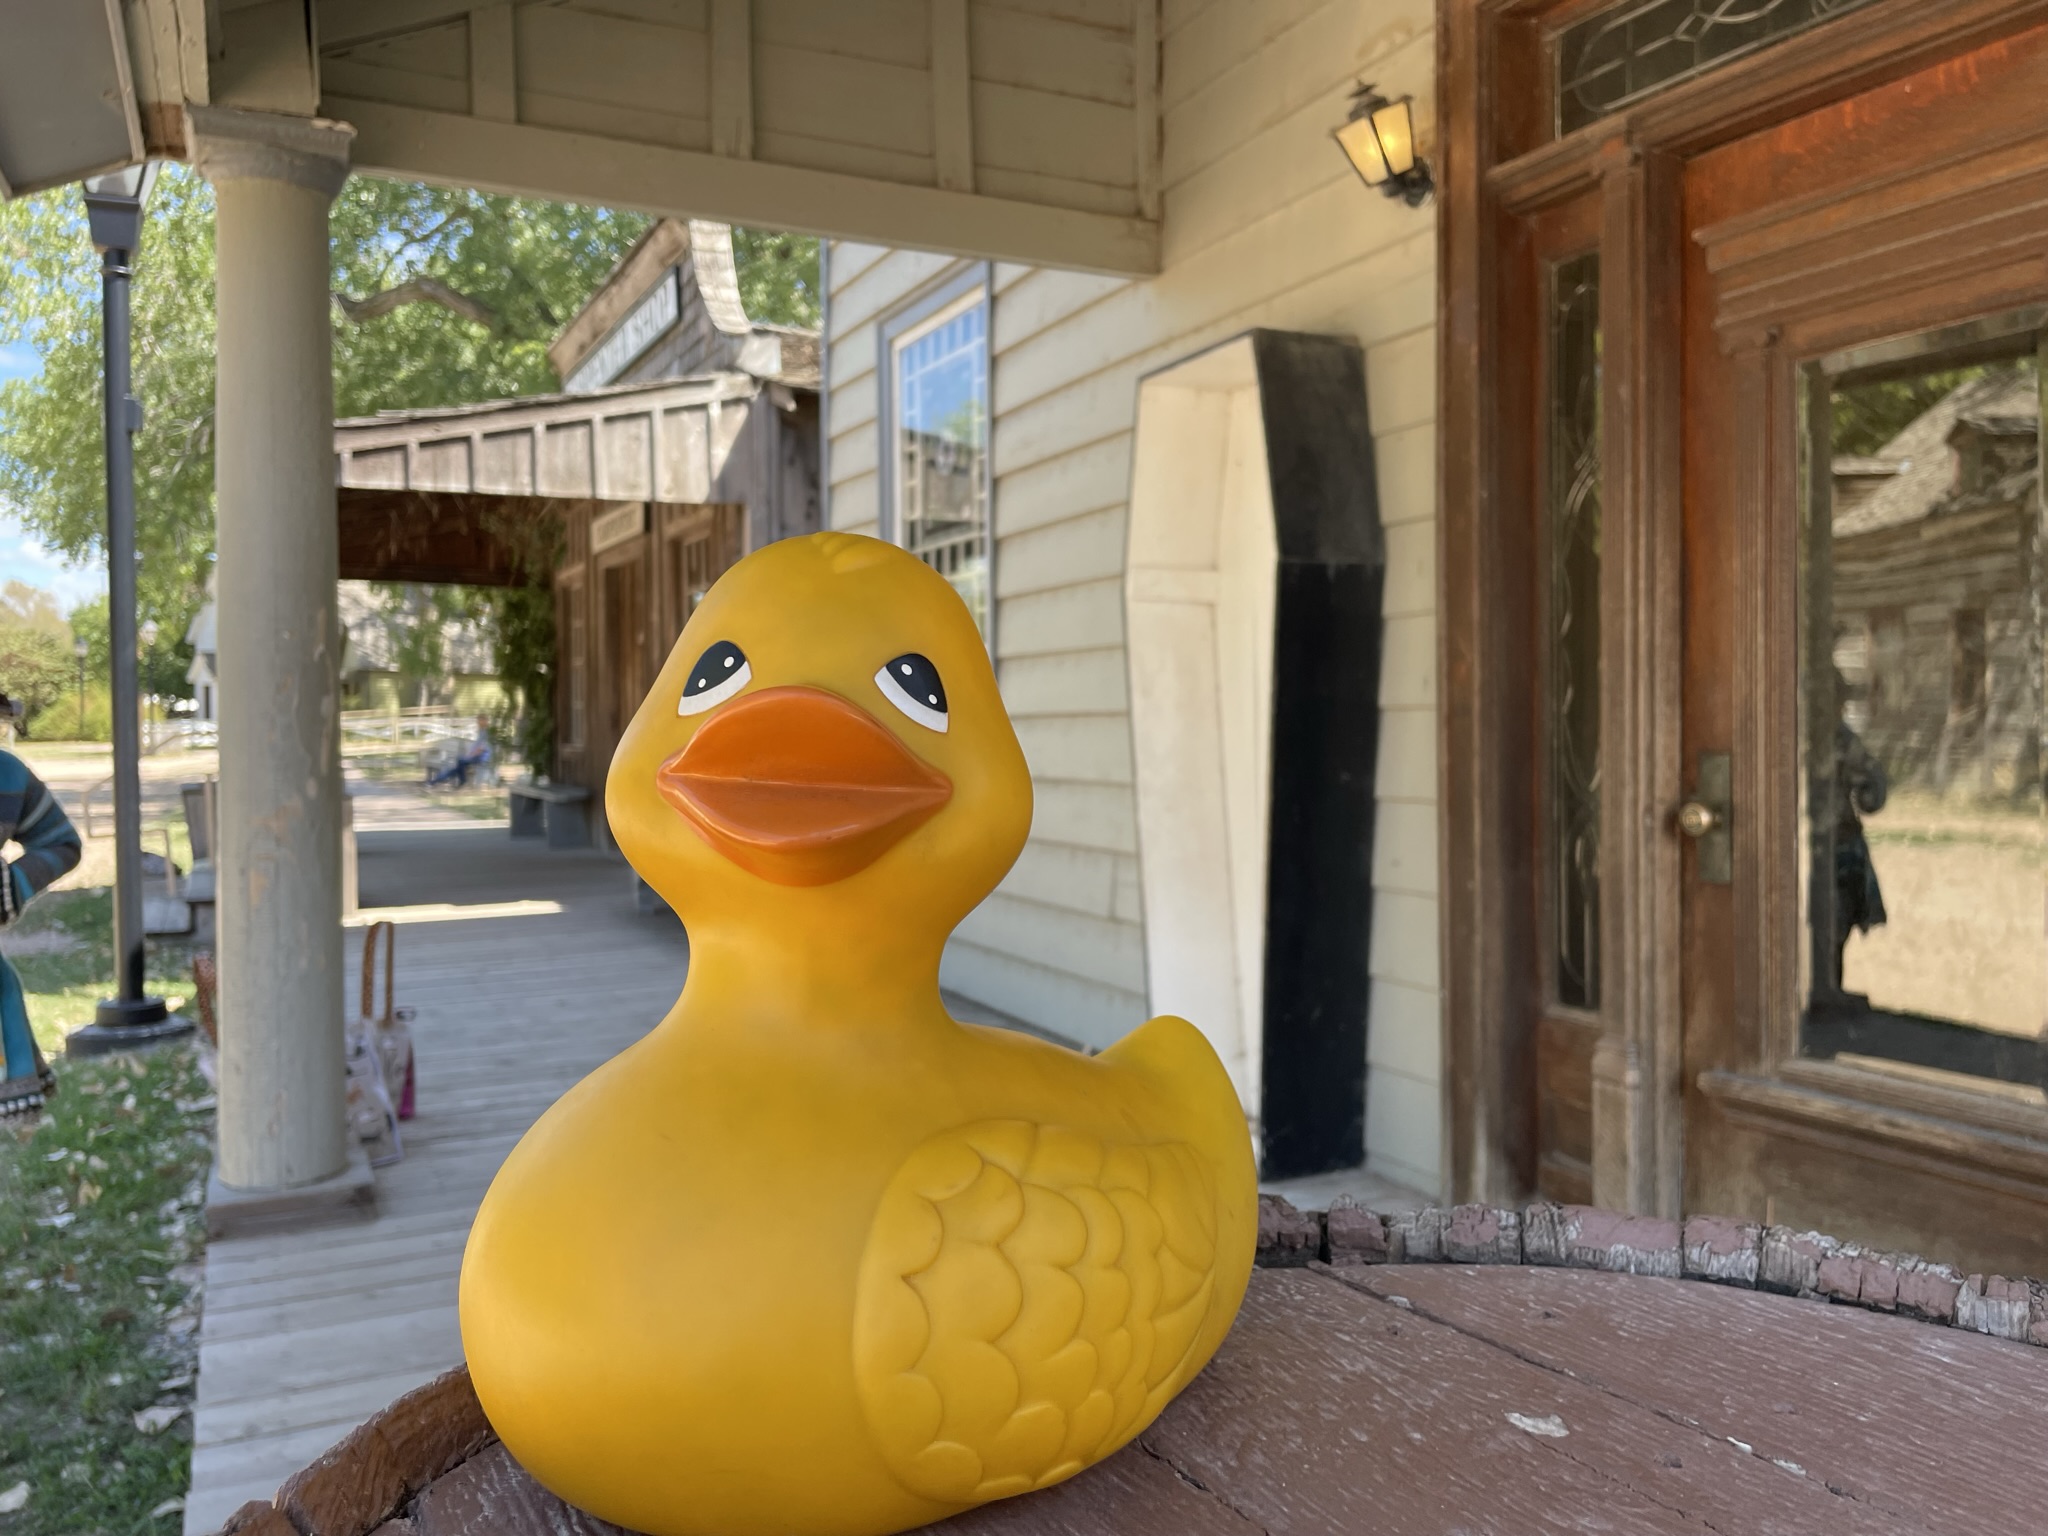 The Ducking Images, Fall 2022 Edition 21